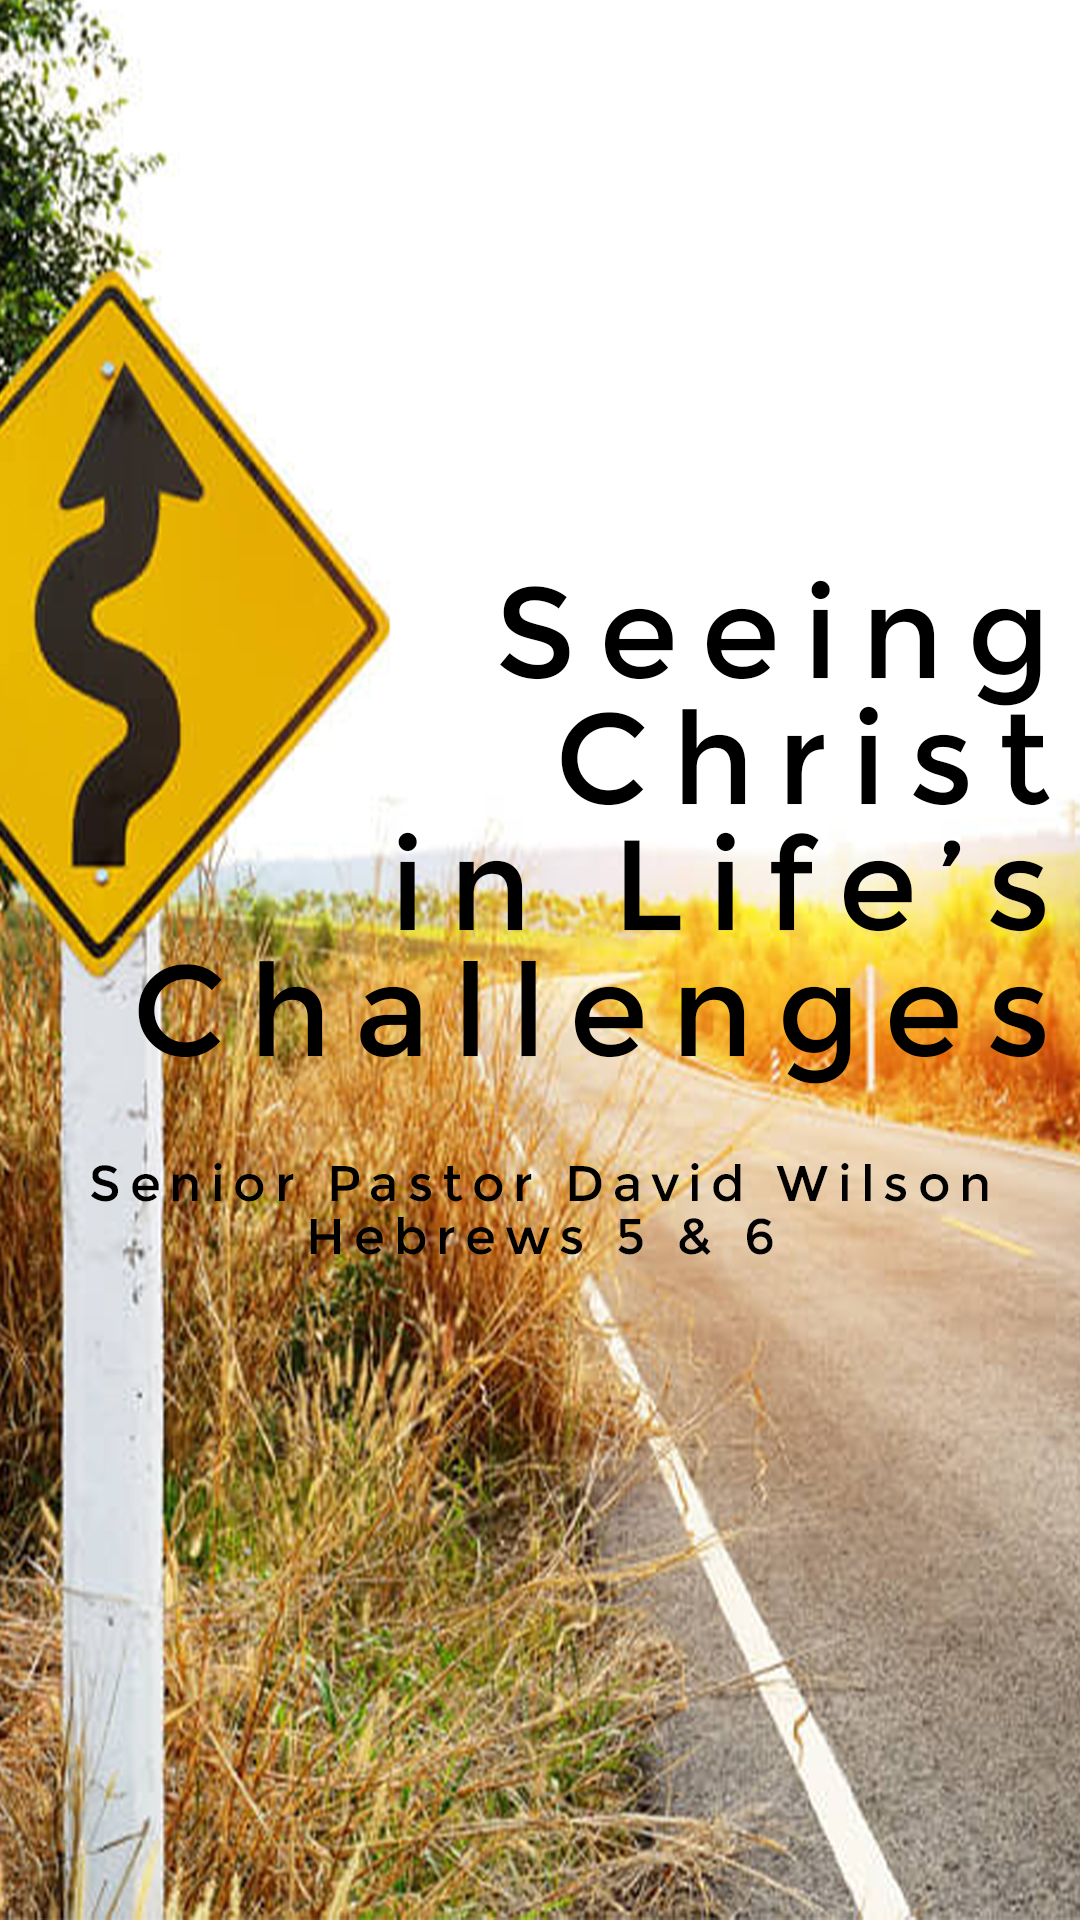 Seeing Christ in Life’s Challenges